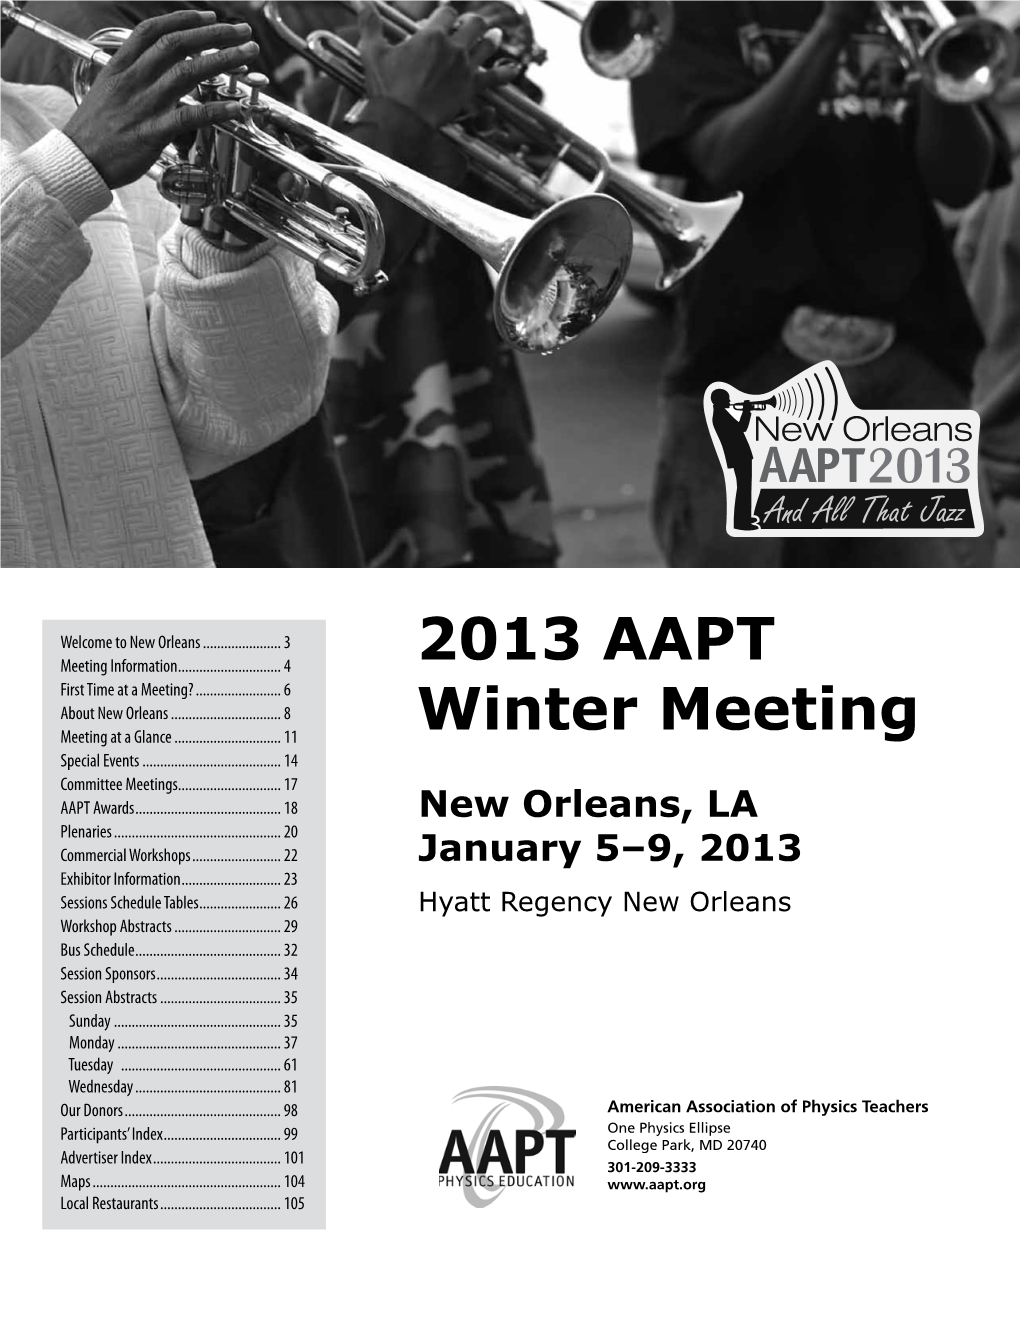 2013 AAPT Winter Meeting in New Orleans! Everyone at AAPT Hopes You Fulfill All the Goals You Have for Attending This Meeting